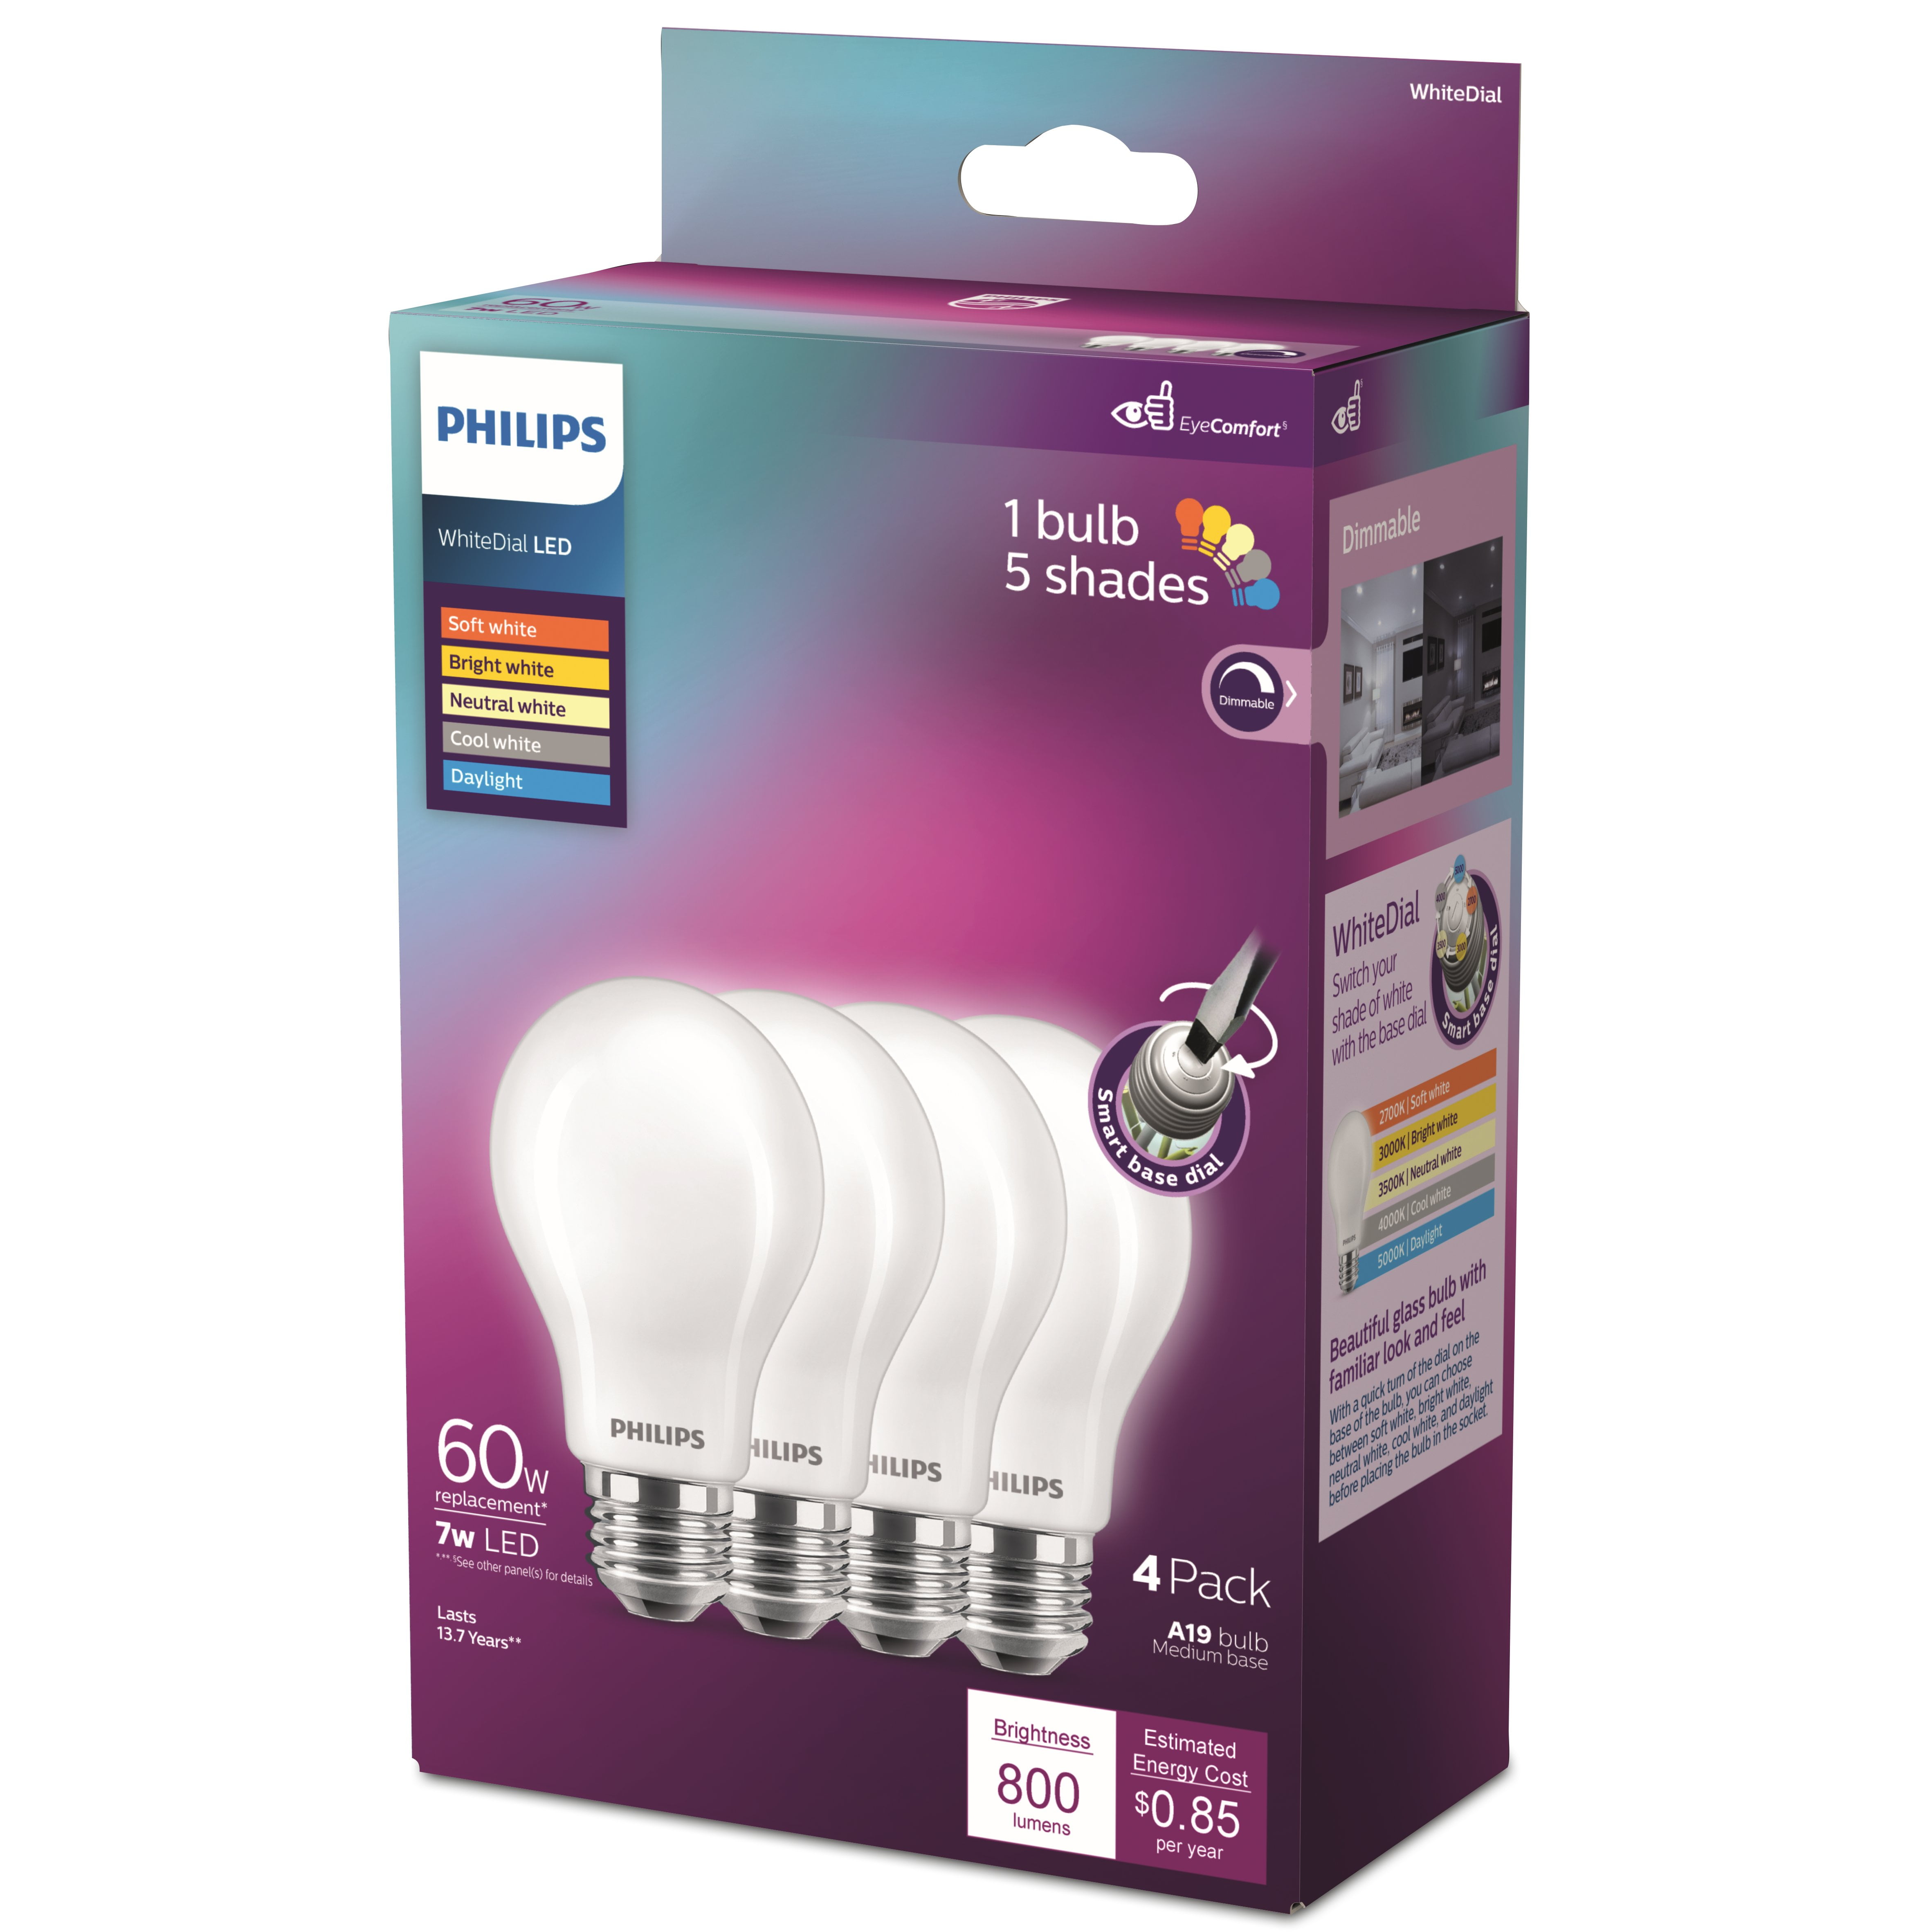 Philips LED 60-Watt A19 Bulb, Frosted & Tunable Dial, Dimmable, E26 Medium Base - Walmart.com